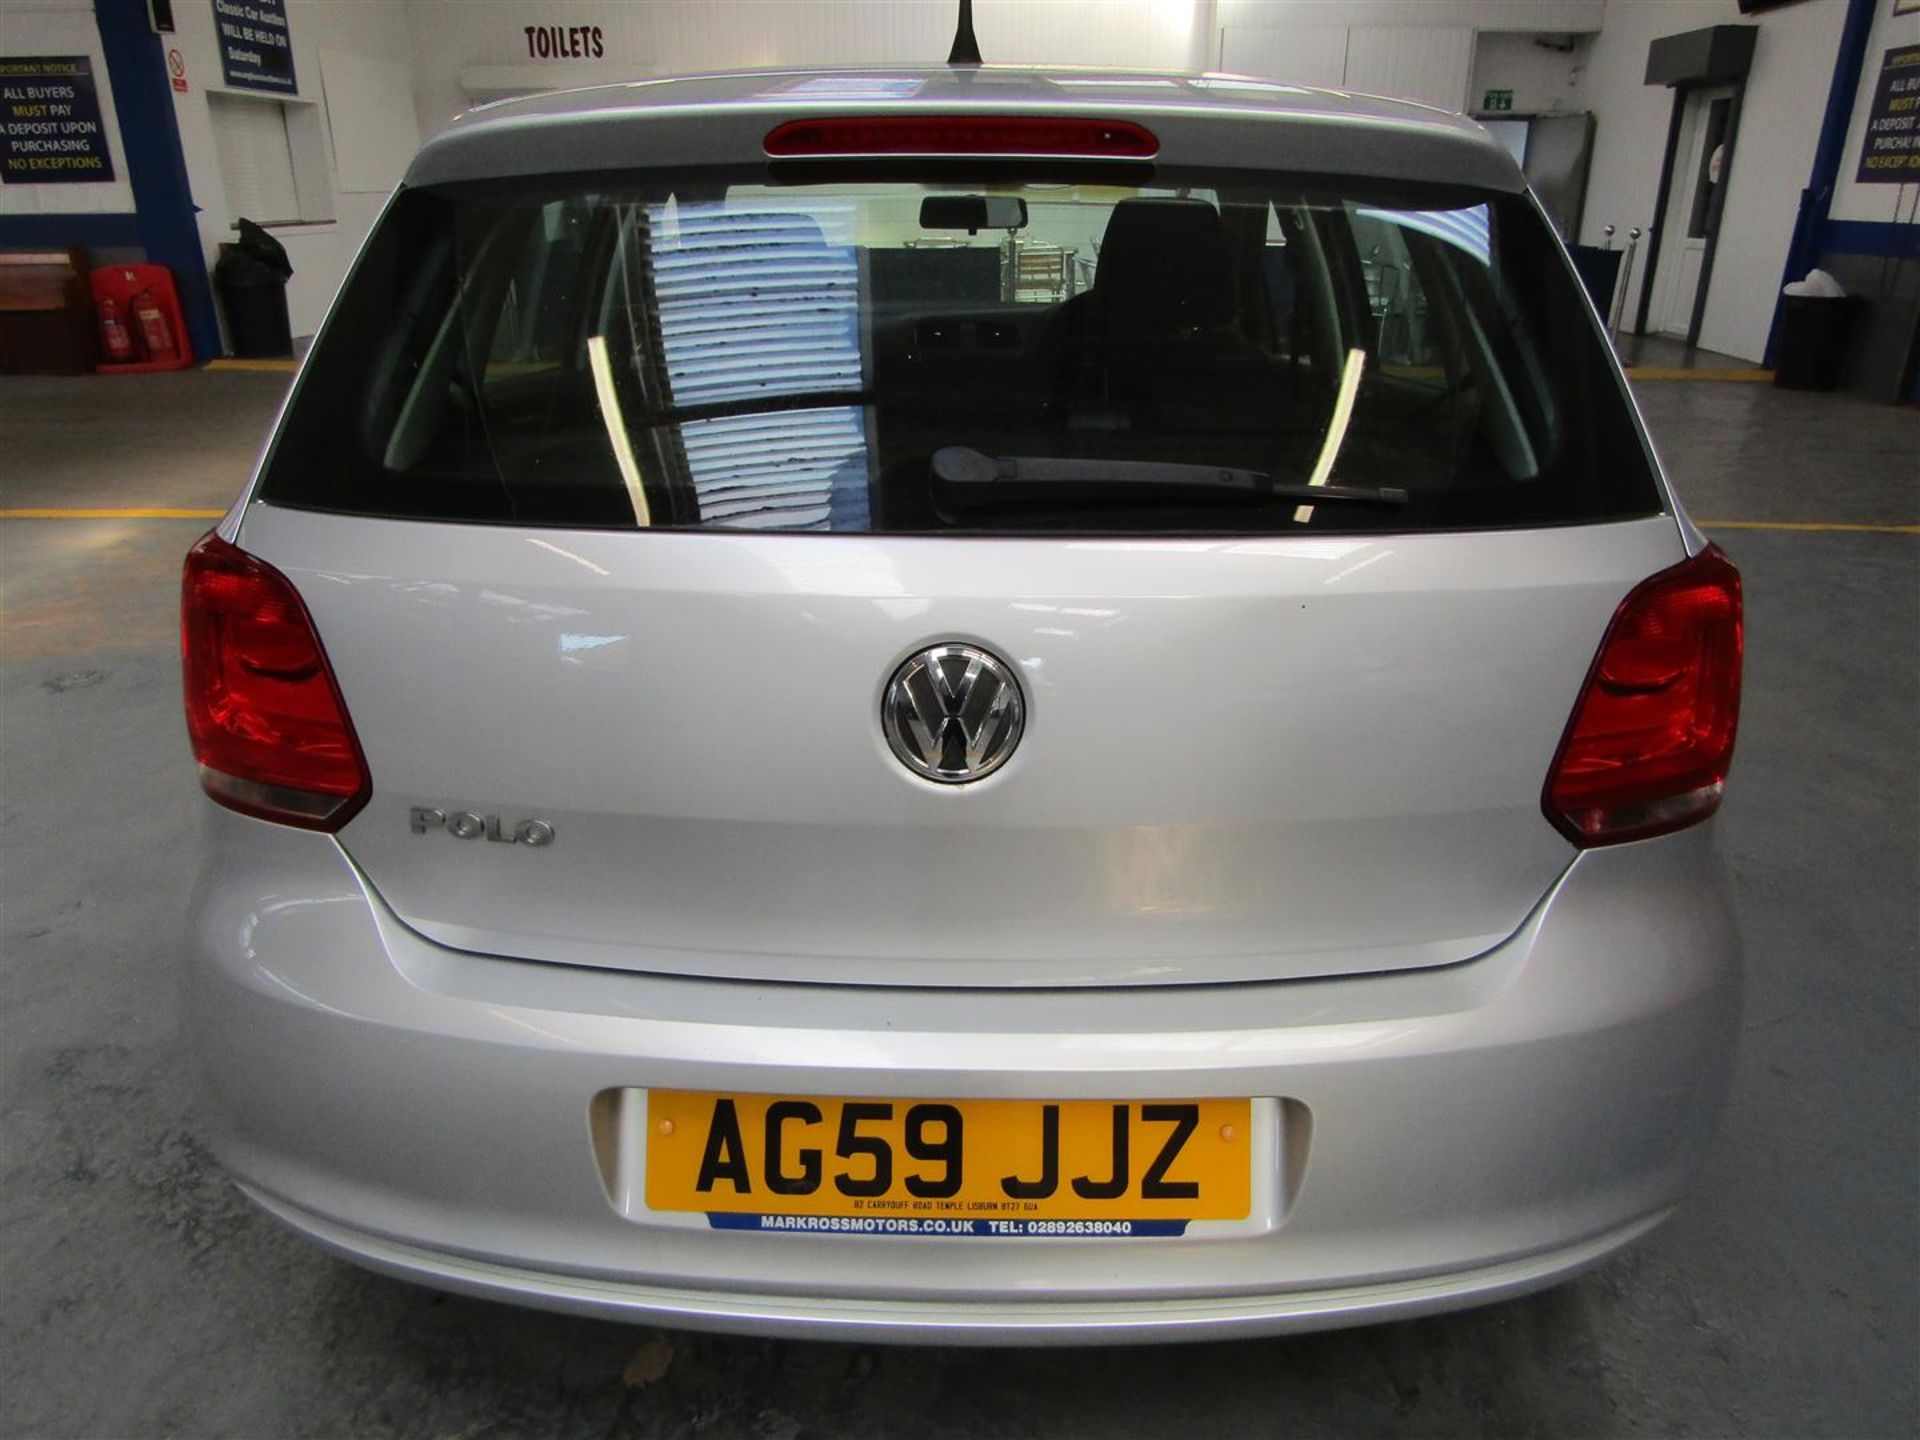 59 10 VW Polo S 60 - Image 27 of 29